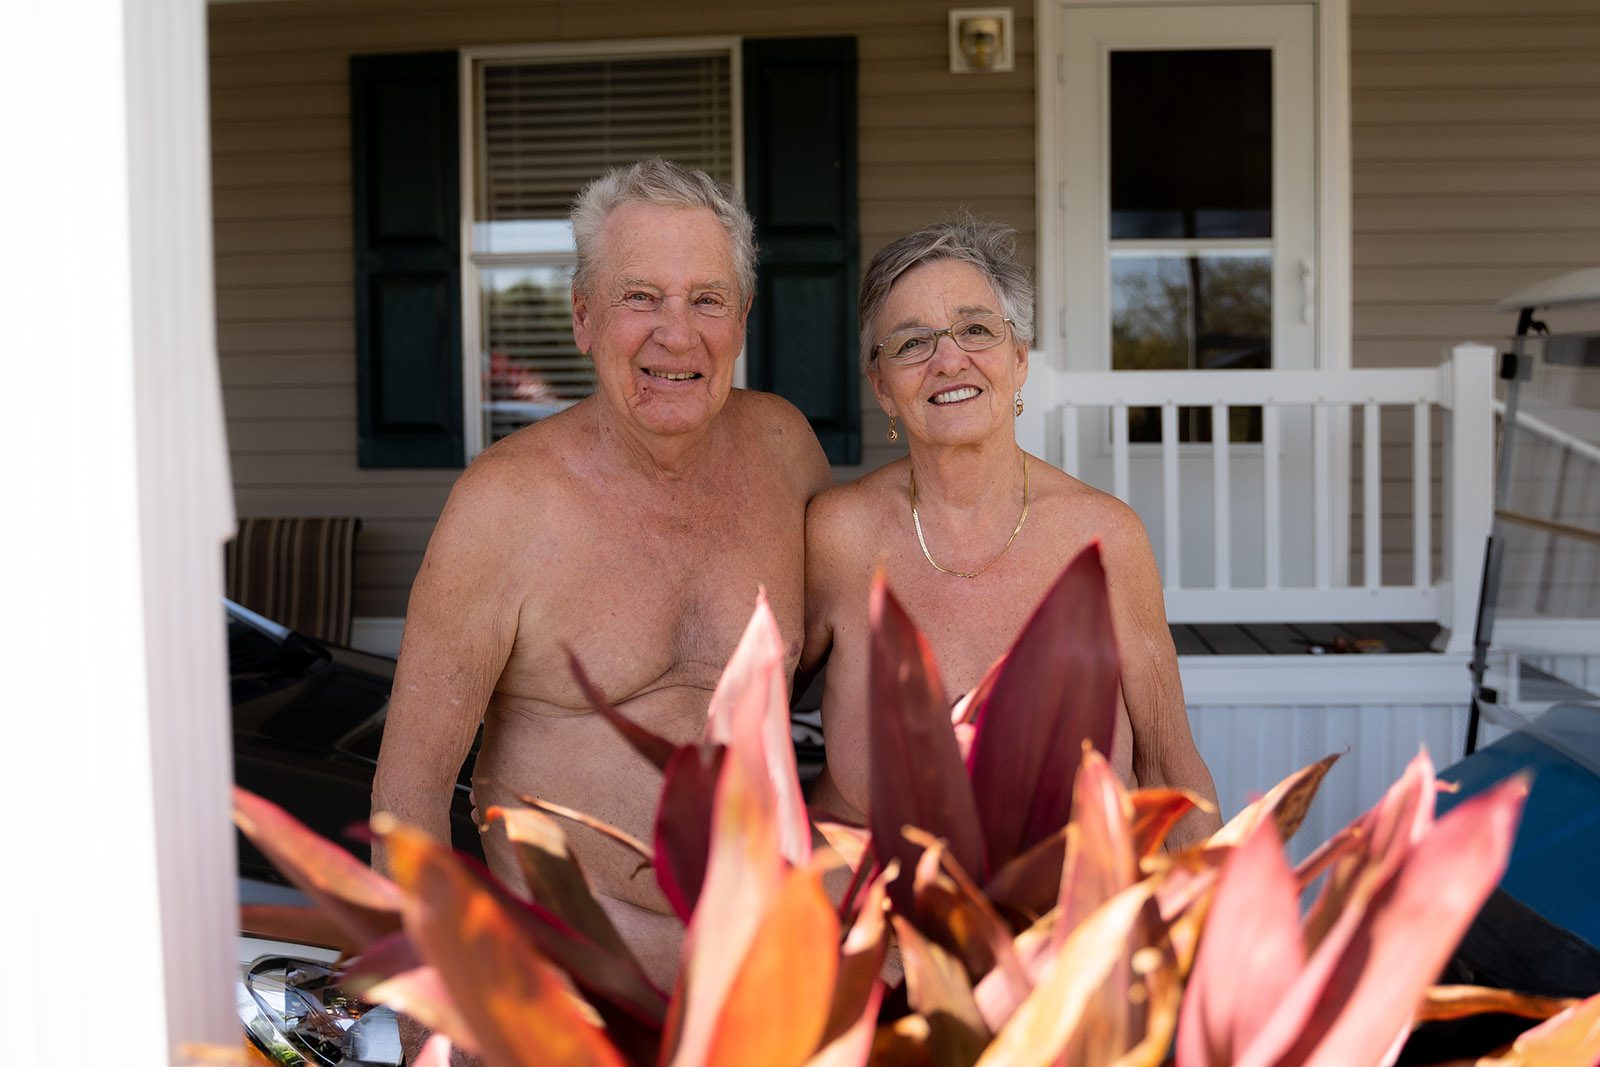 Naked and unashamed Christians strip down at a South Texas nudist community pic